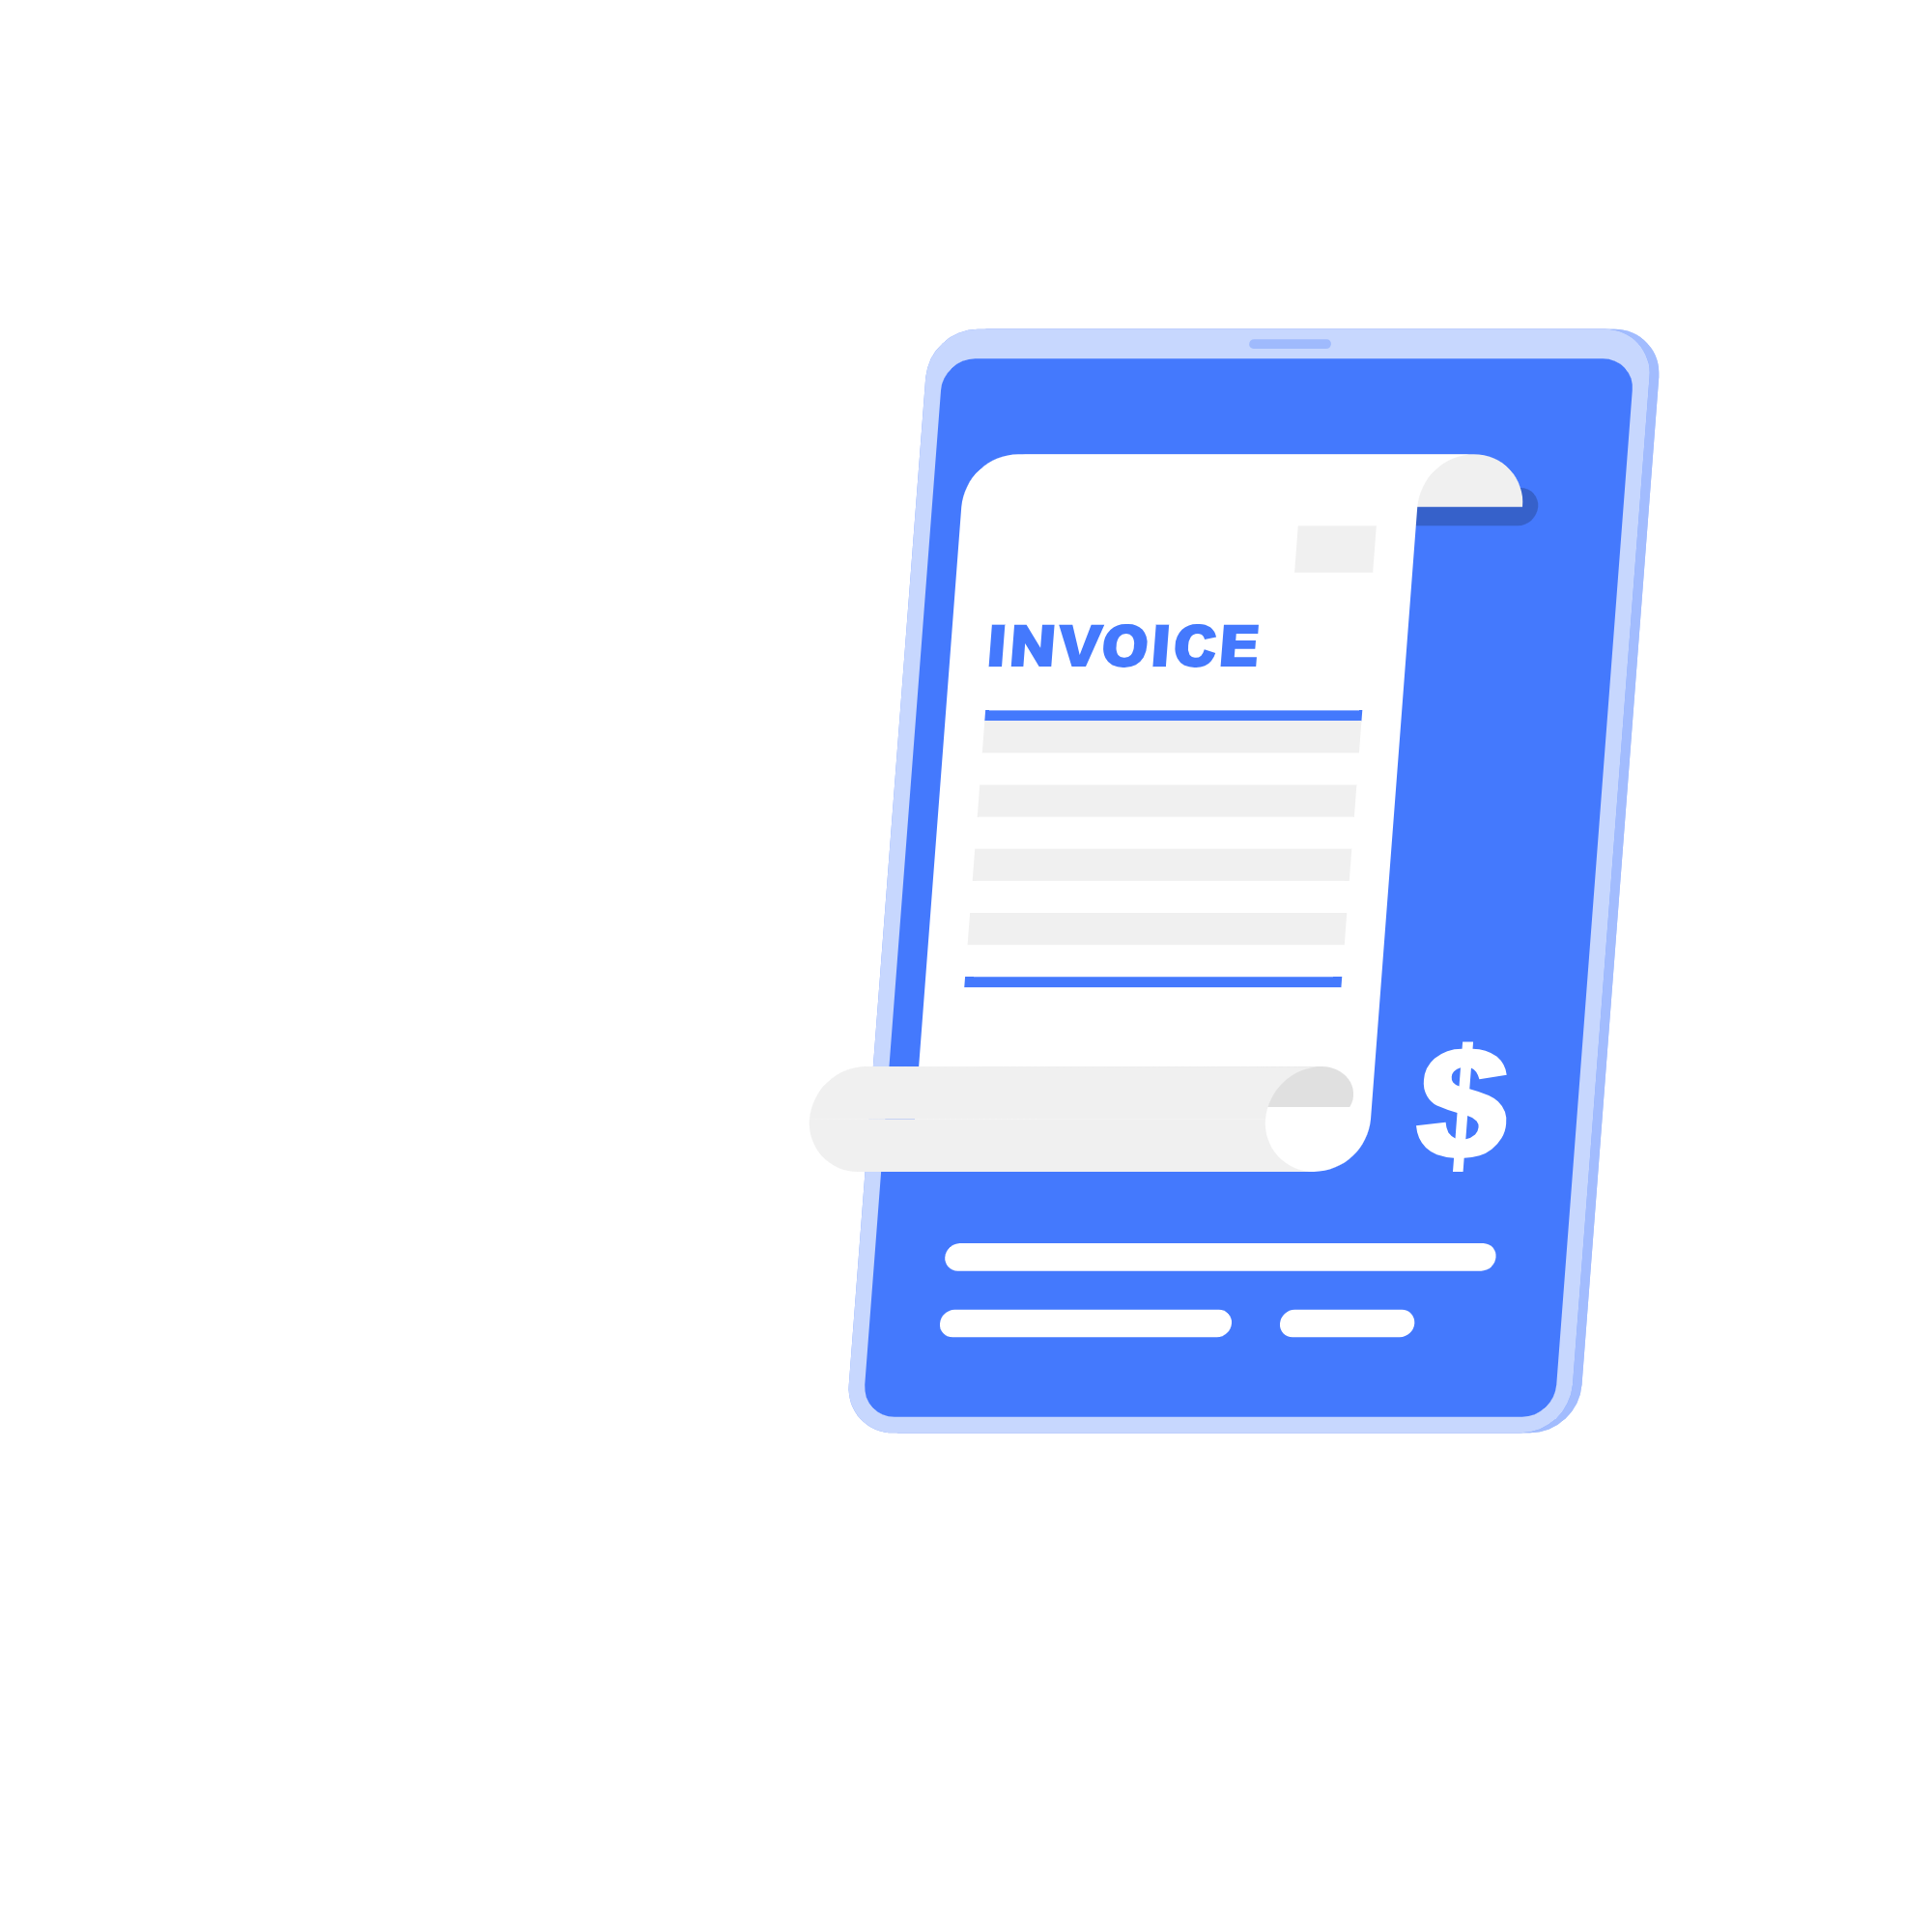 Auto generated invoice thermal print